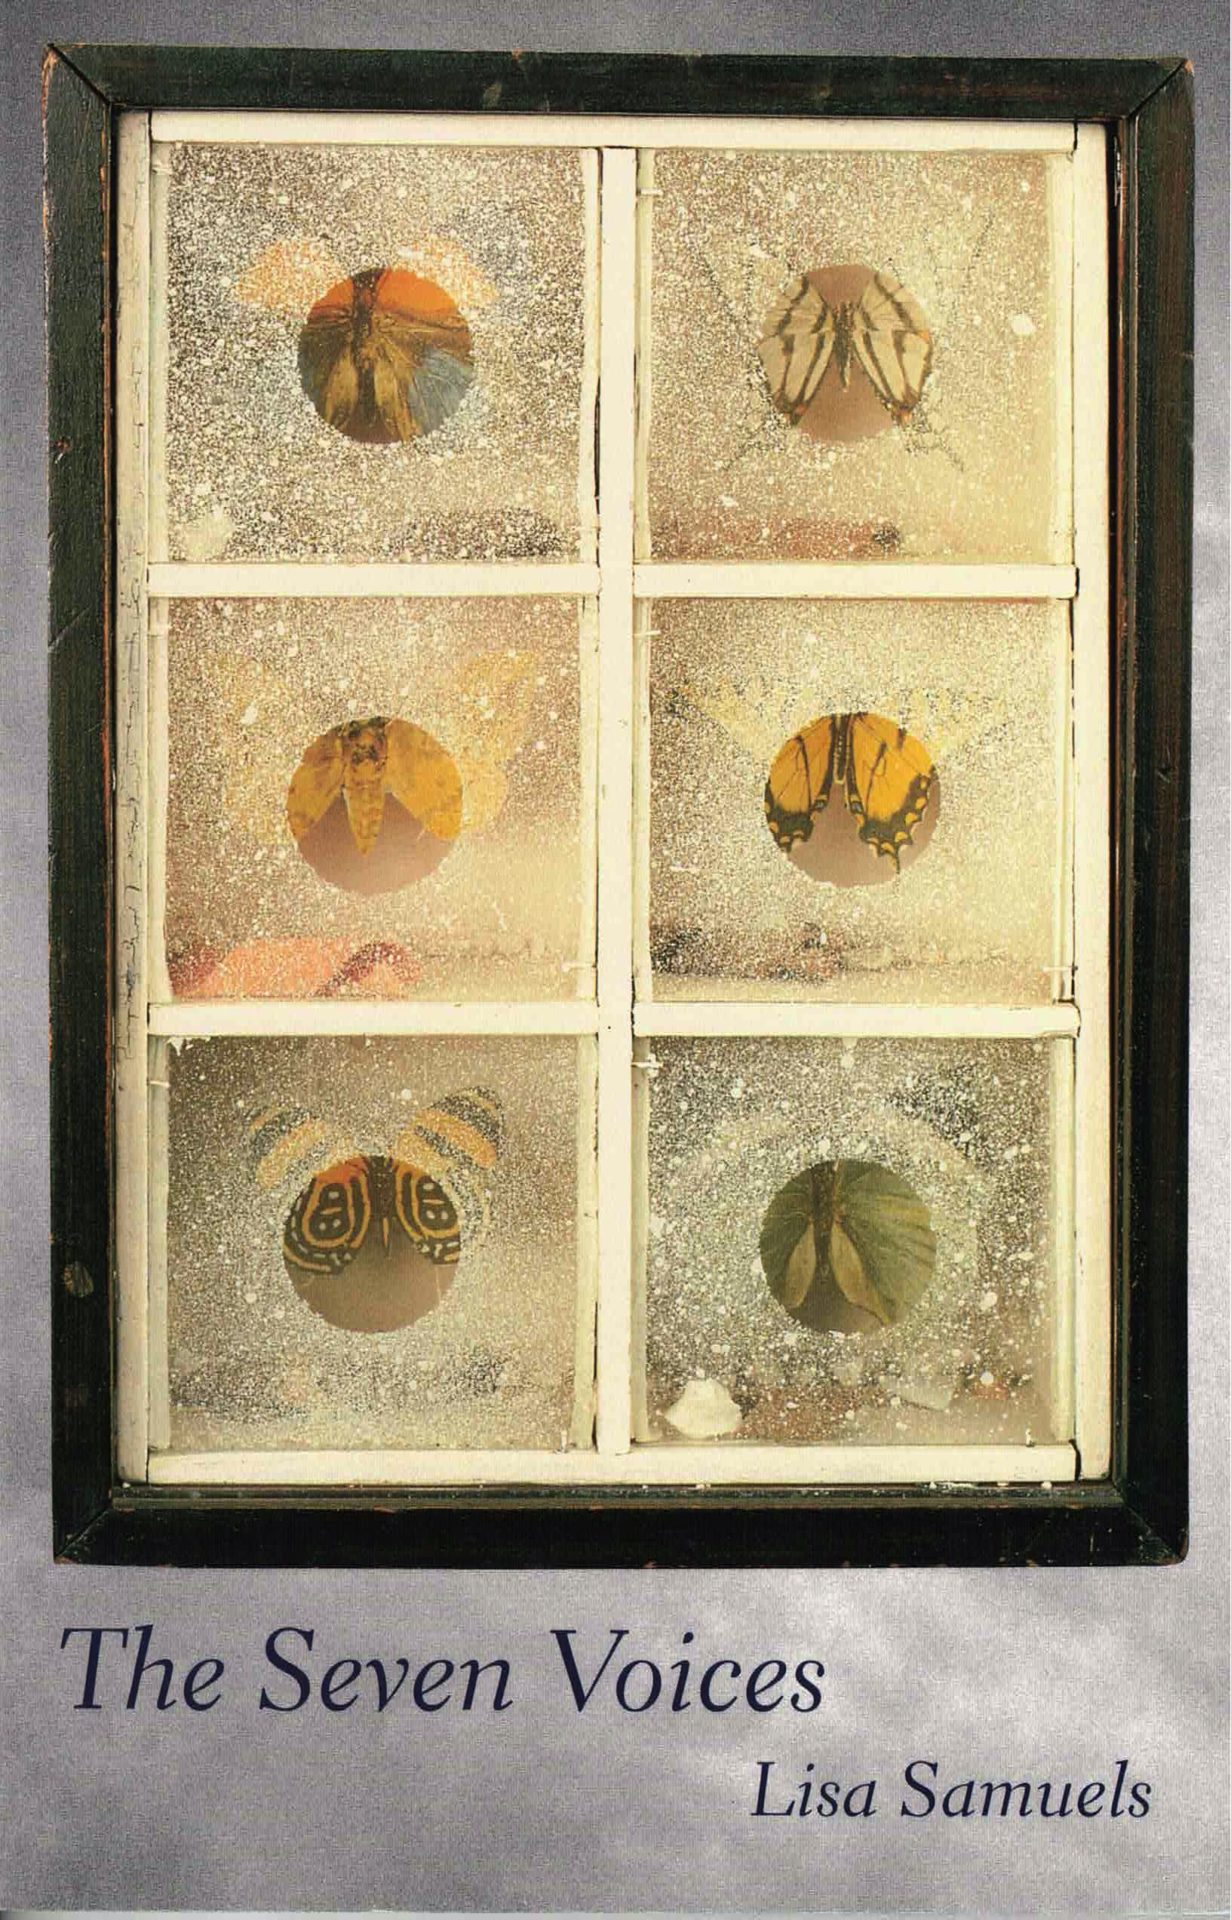 cover of The Seven Voices by Lisa Samuels, drawing of six butterflies separated by wood slats in a glass case, each pane of glass dusty with a clean/clear circle in the center of each